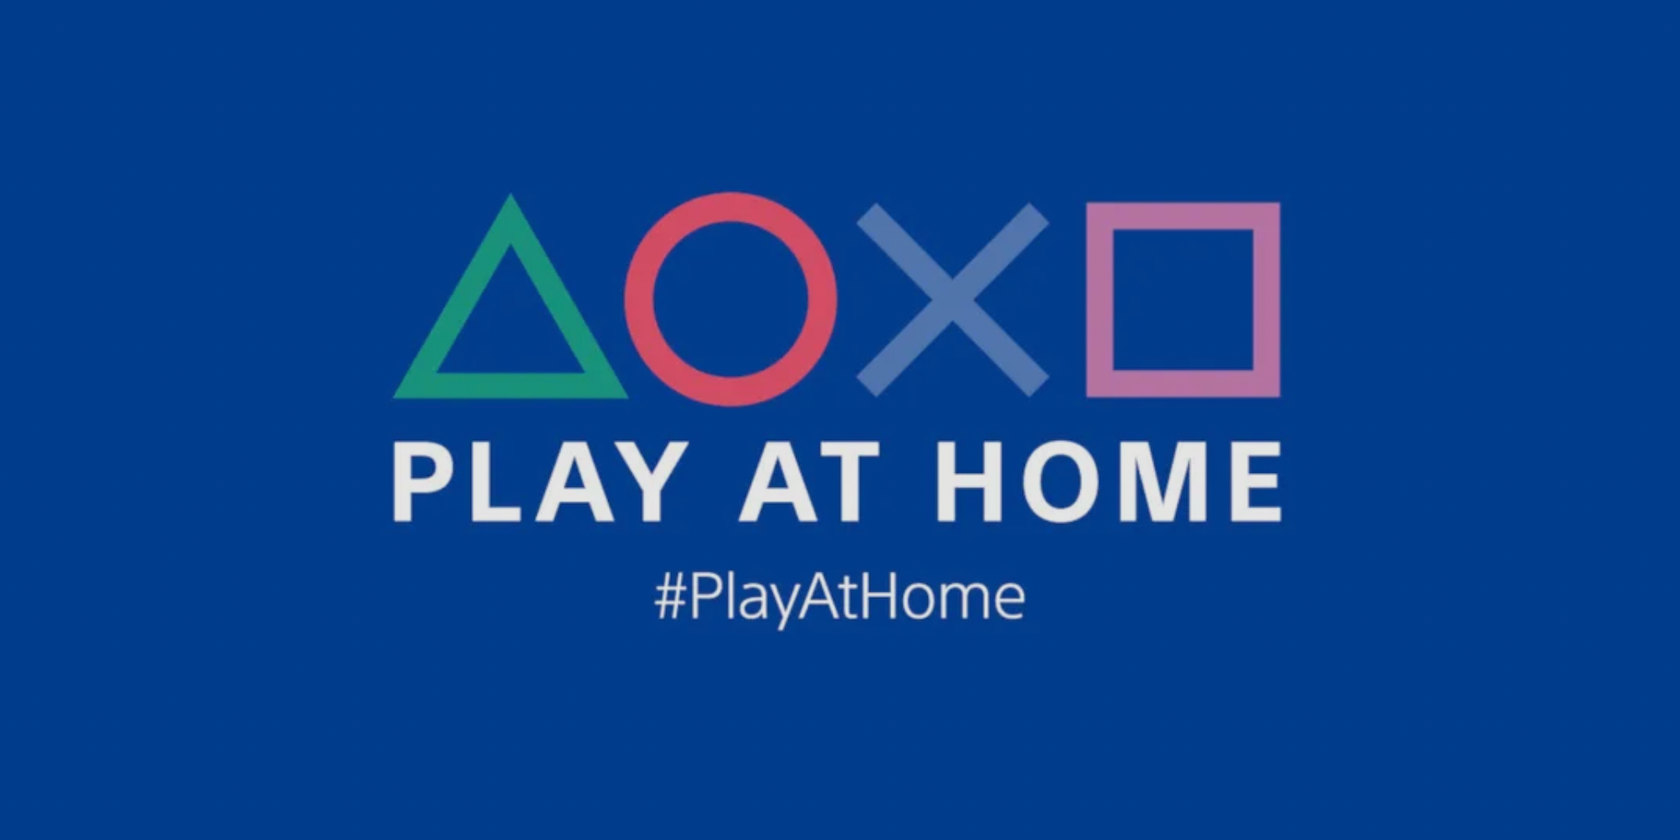 How to Get Free PS4 and PS5 Games Through Play At Home